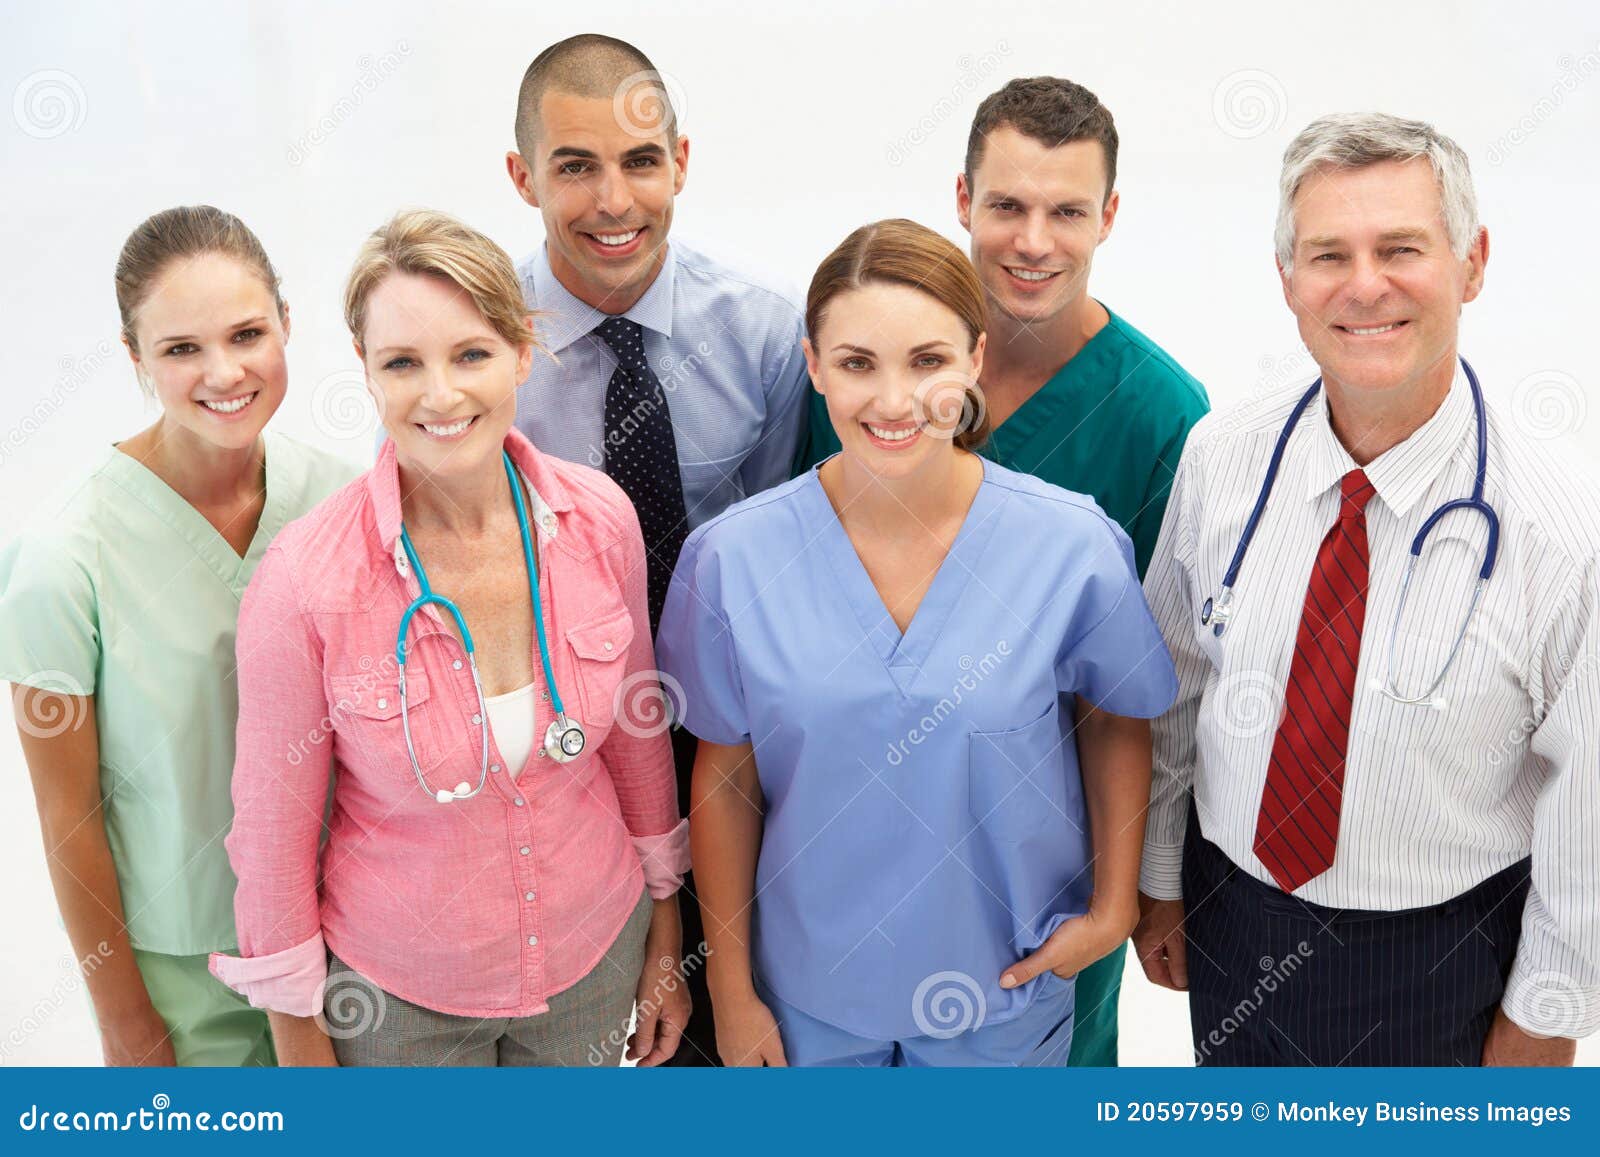 mixed group of medical professionals